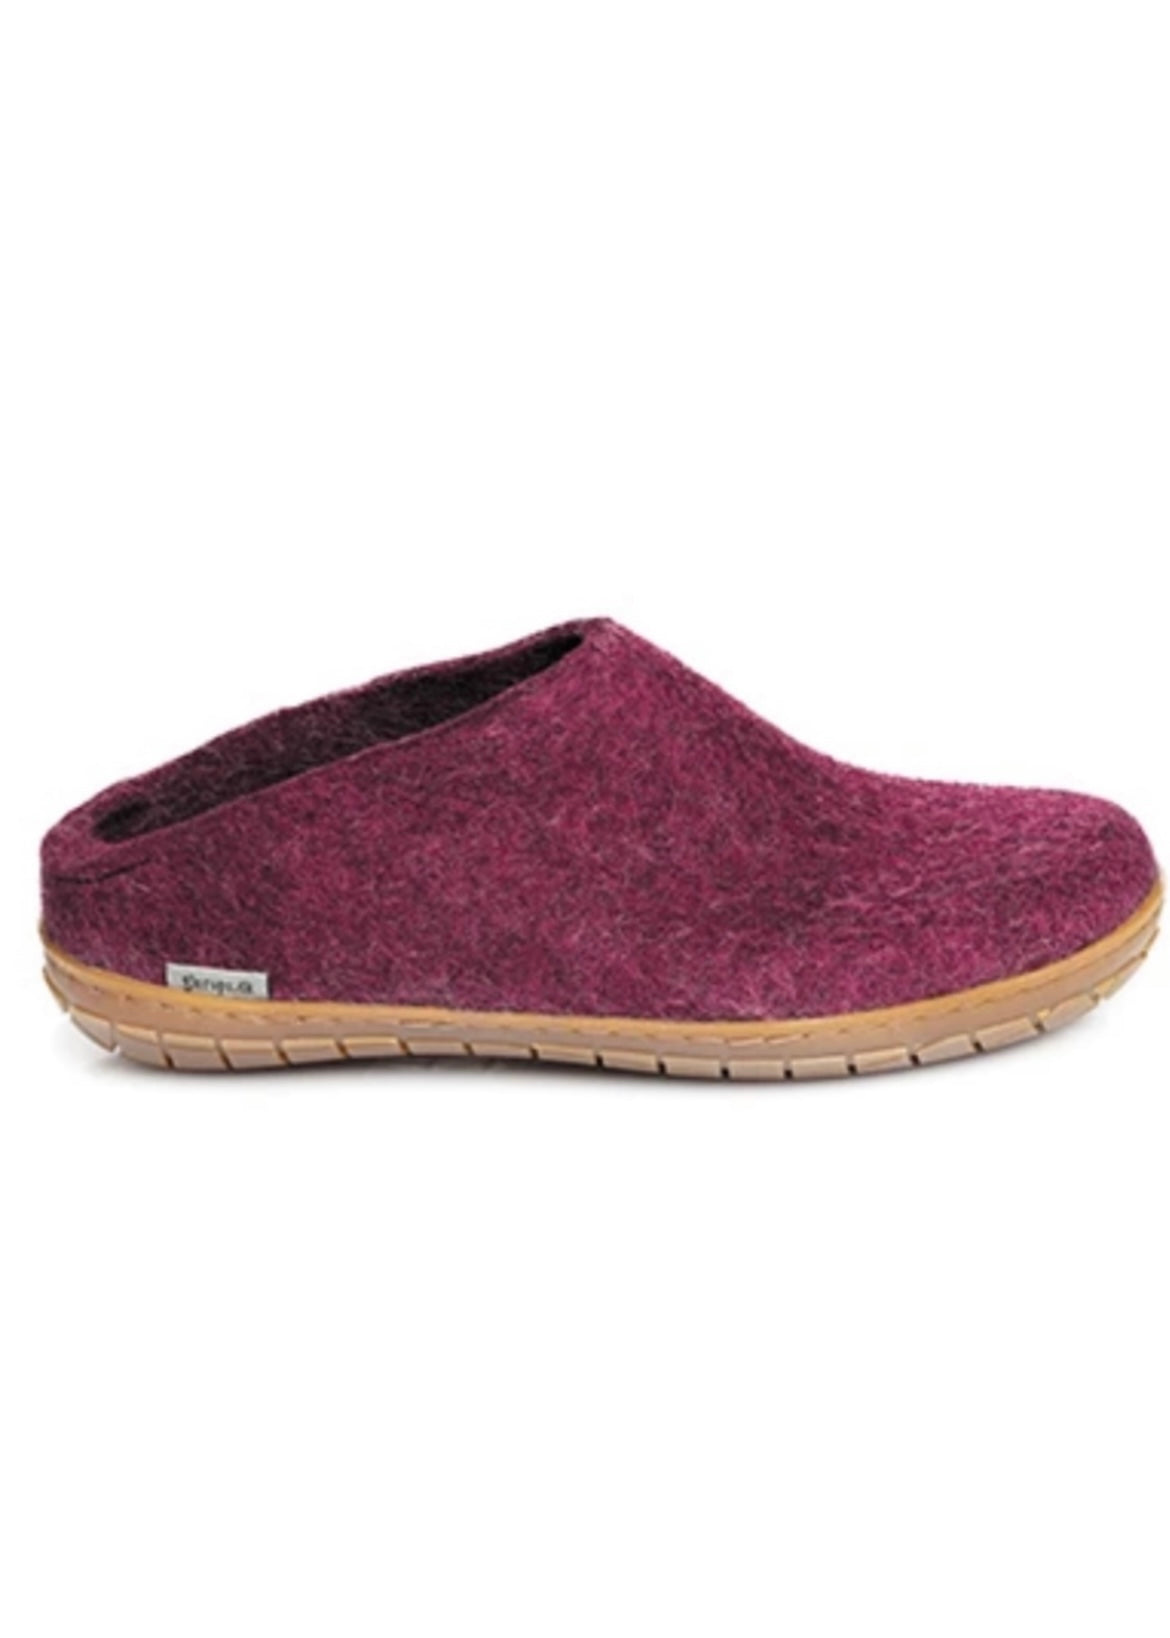 Slipper with Rubber Sole - Cranberry